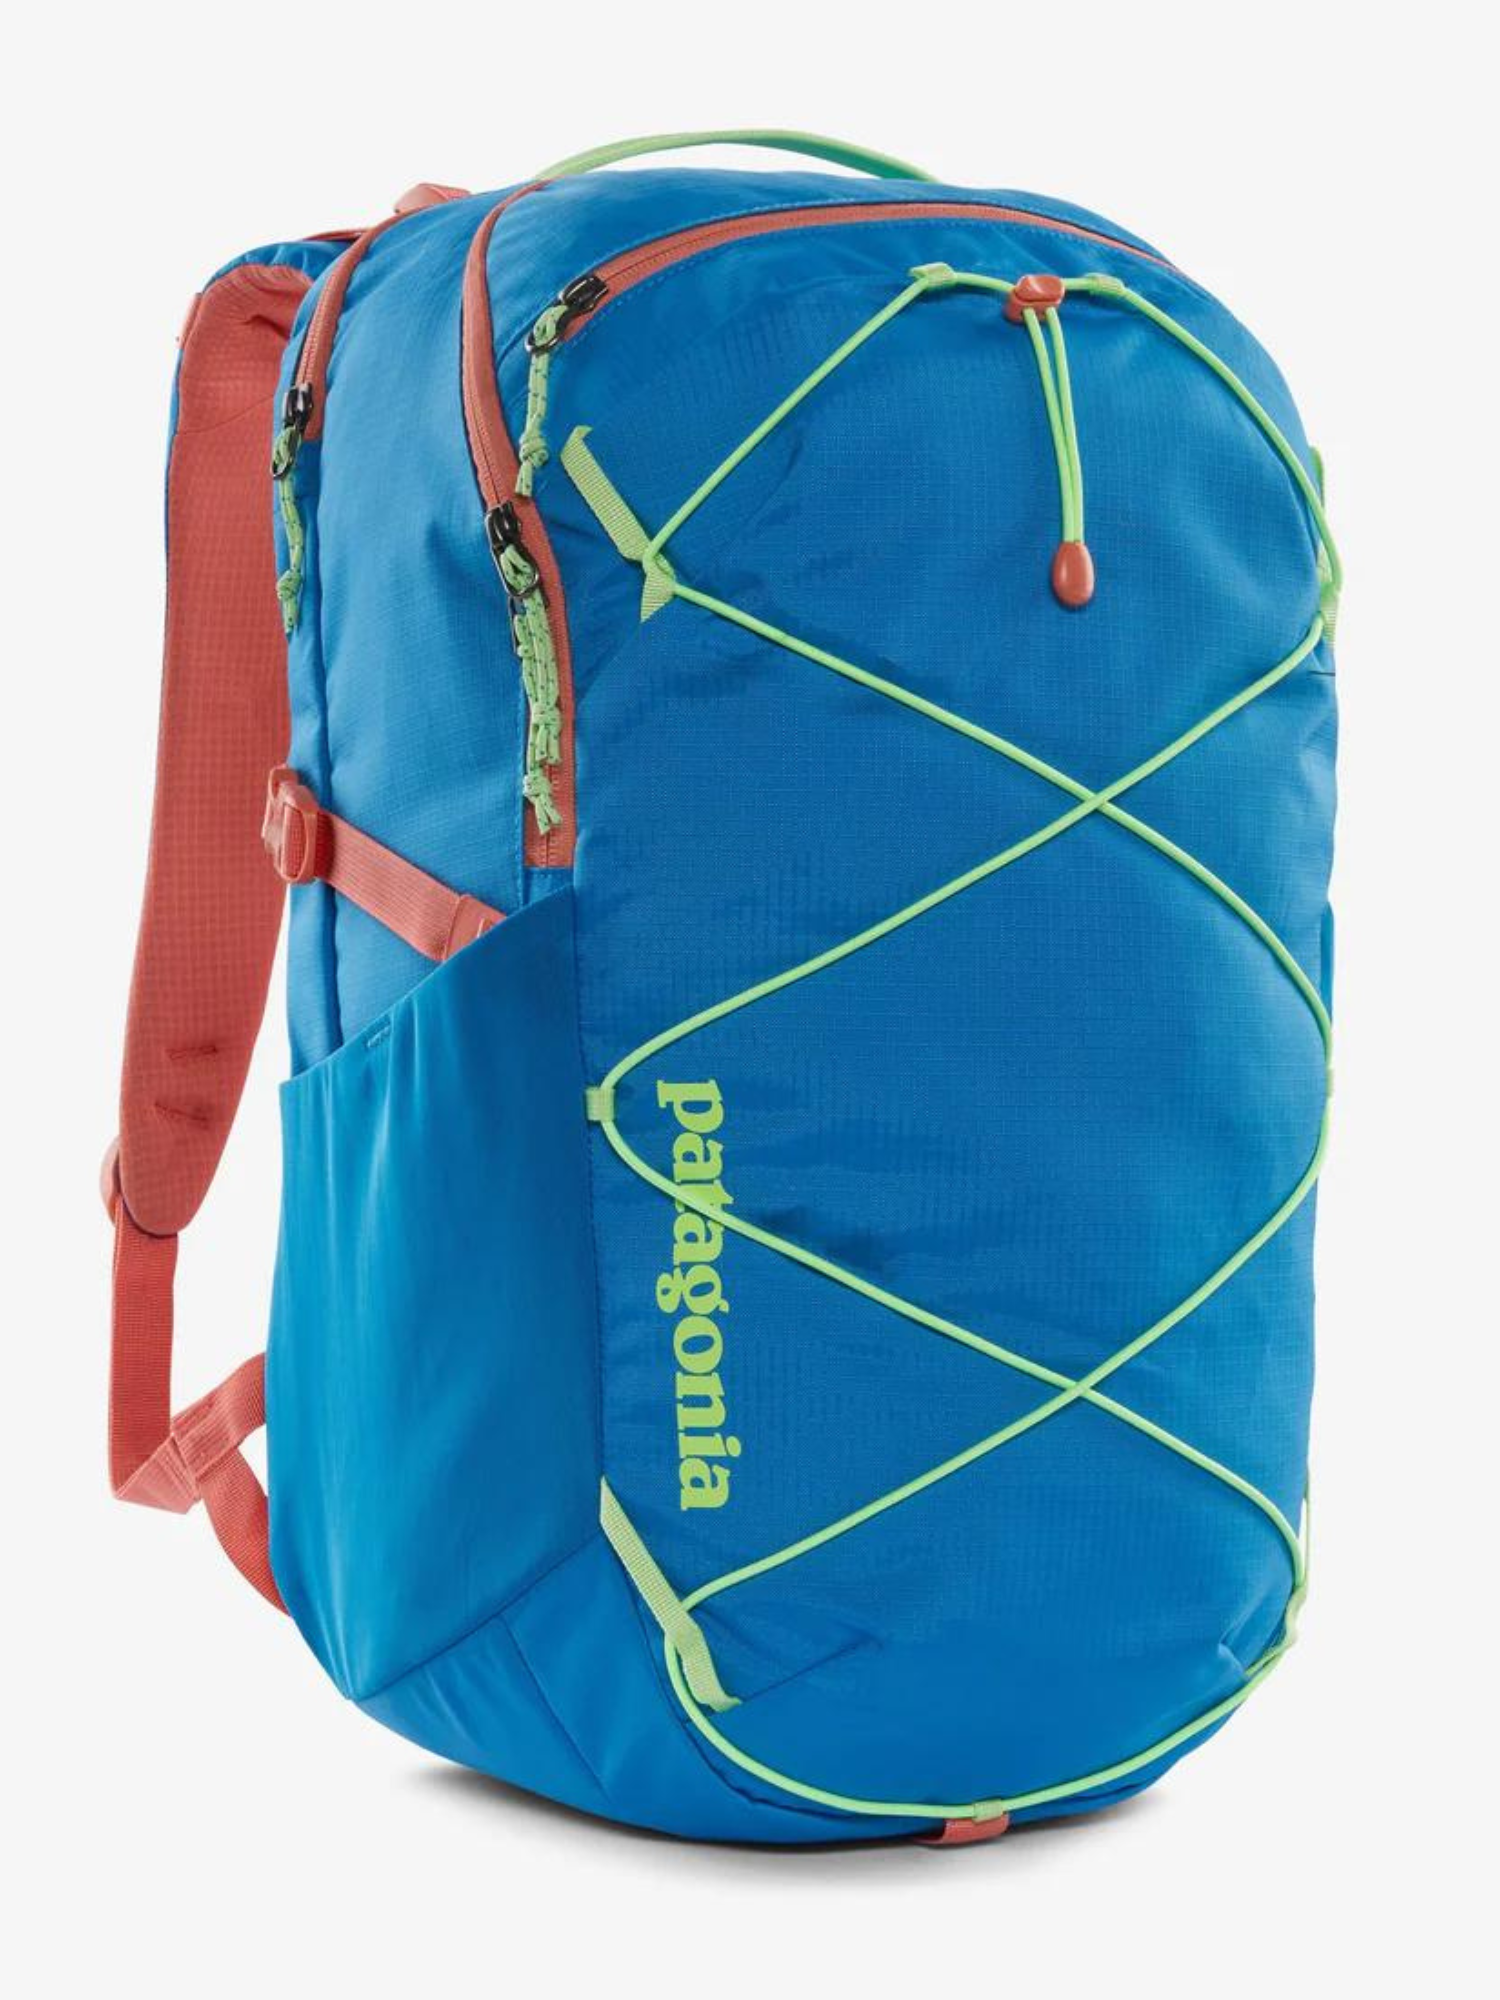 Patagonia Refugio Day Pack 30L - Vessel Blue